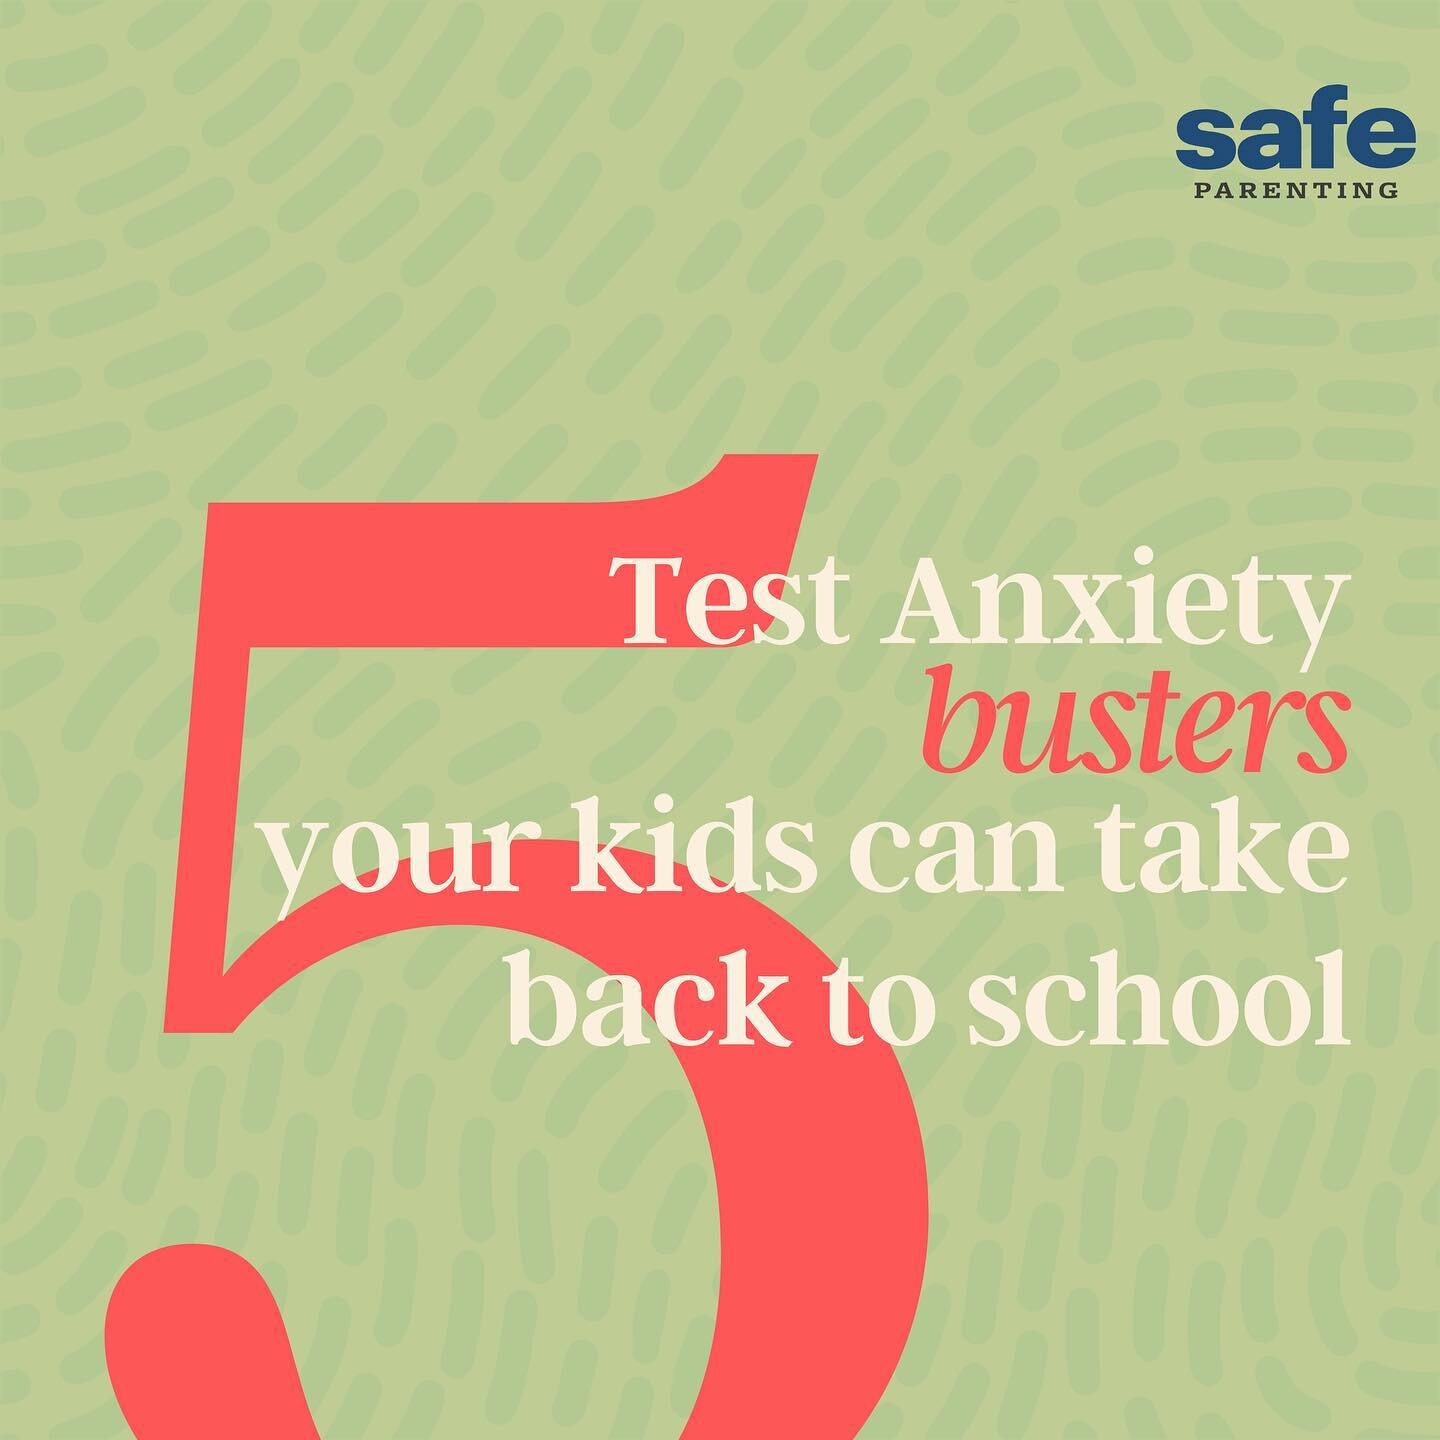 Test taking can be a huge source of anxiety for young people as they go through the school year.  There are ways to combat these big feelings that are easy for children to practice while studying or before taking their test! Simple habits like the 5 